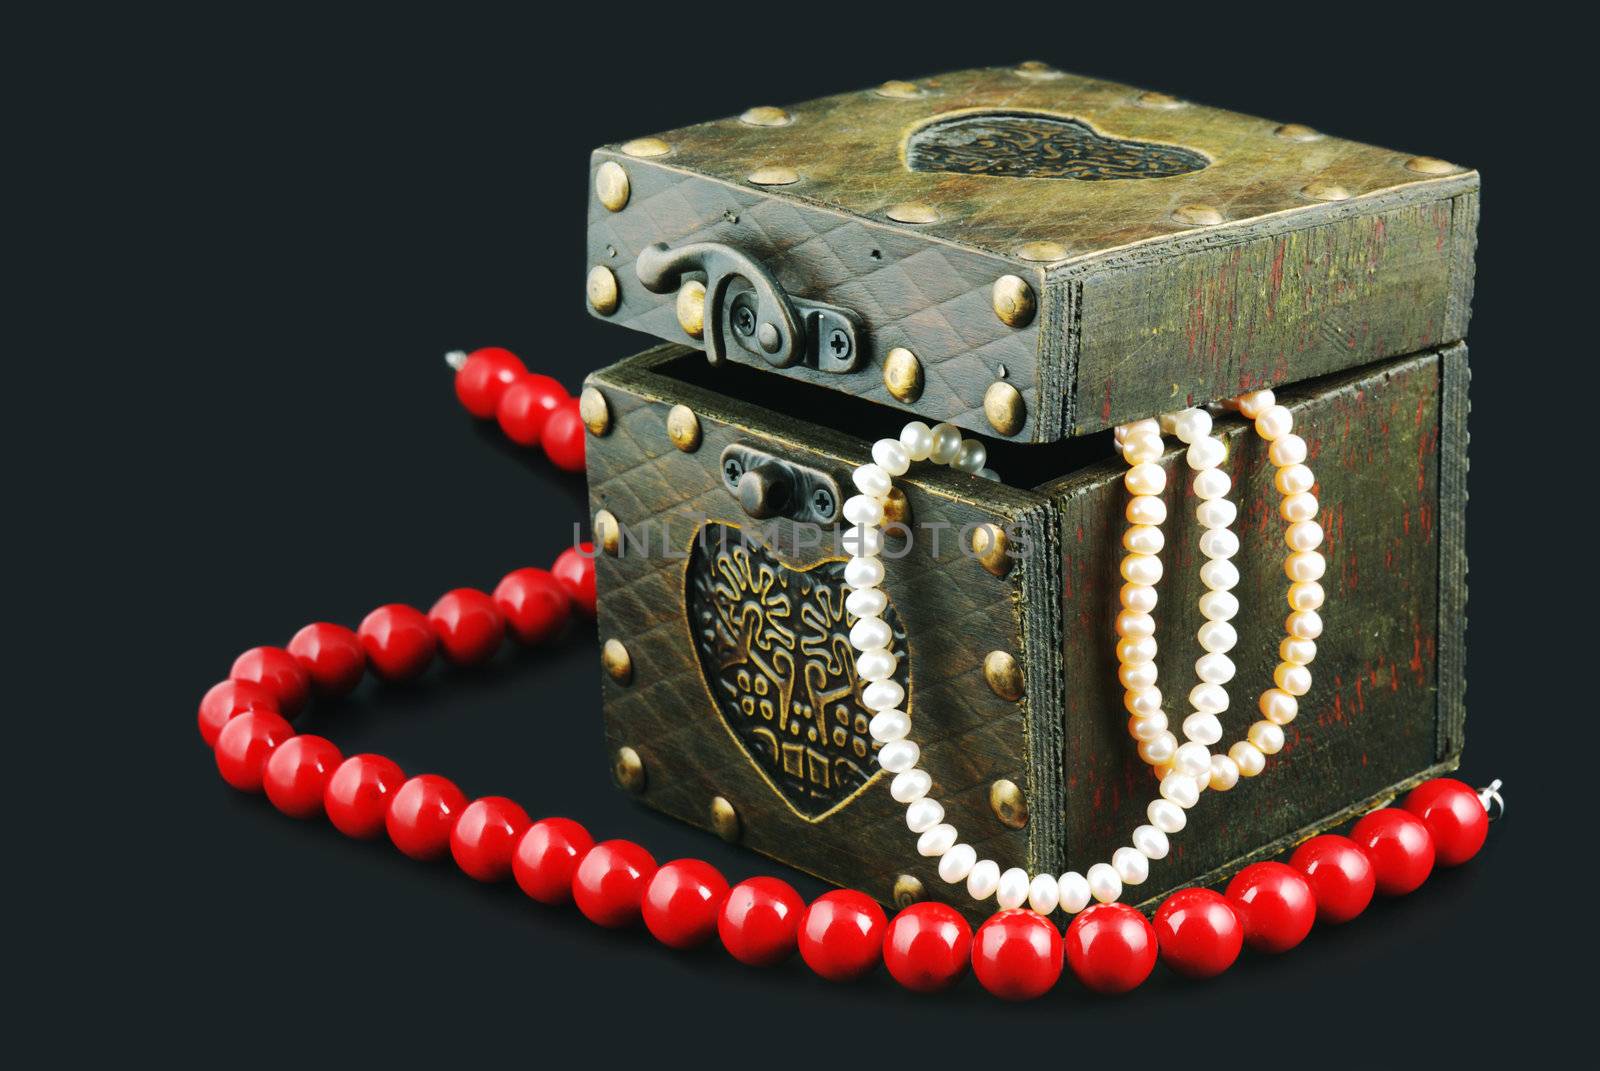 Casket with jewelry. Old, rough wooden boxes fixed by iron